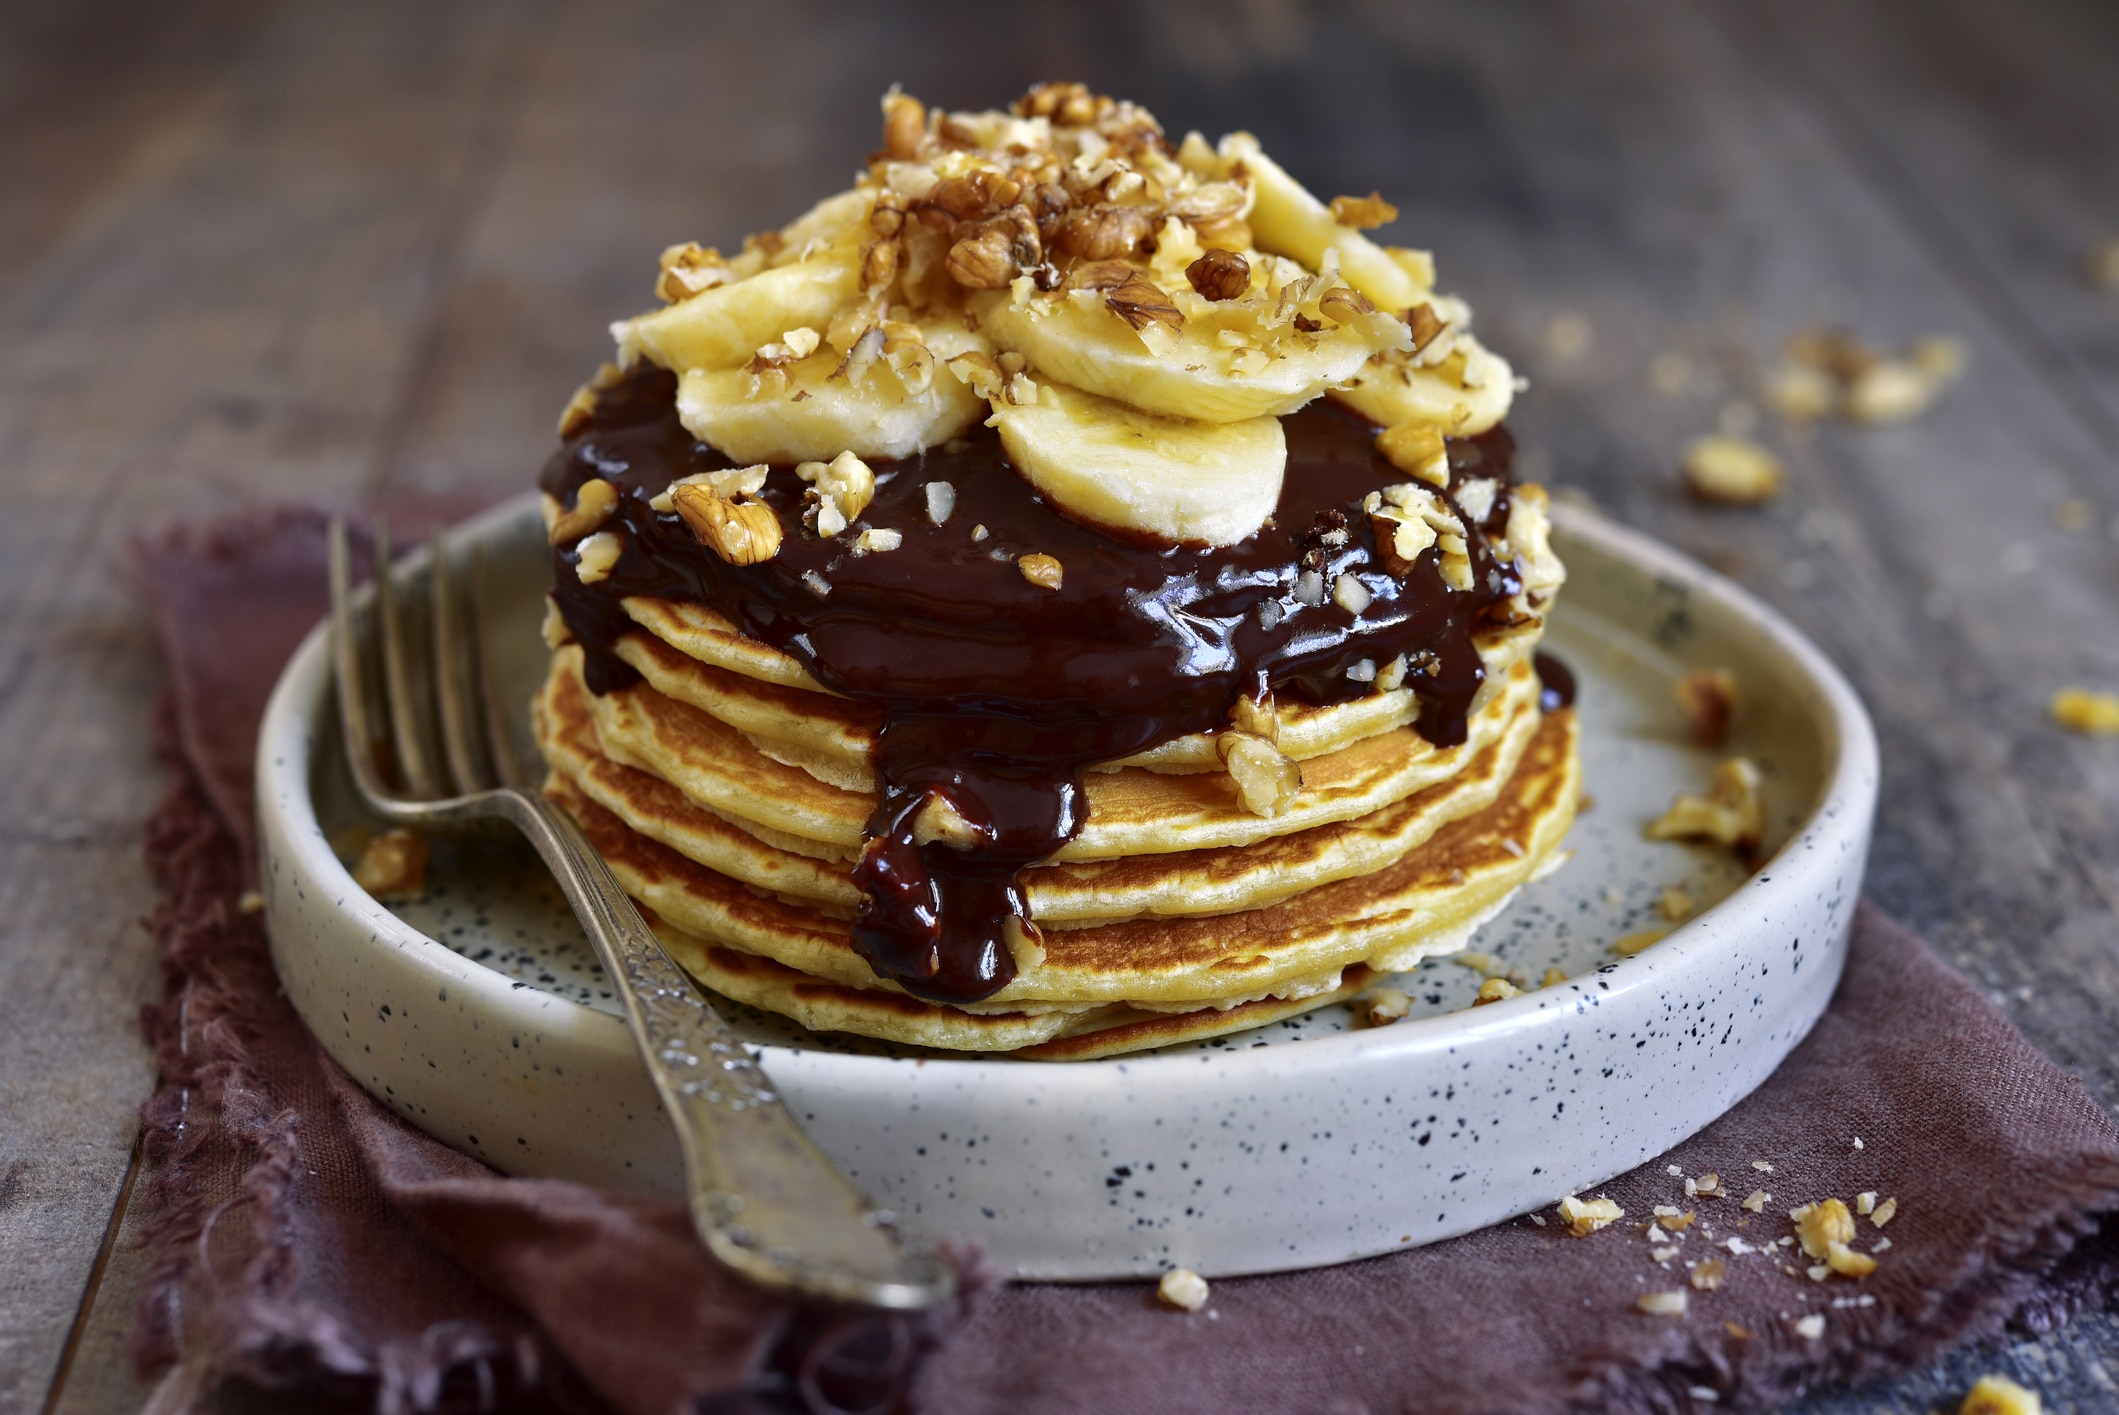 Stack of homemade delicious banana pancakes topped with chocolate sauce, banana slices and walnut on a plate on a dark wooden background.